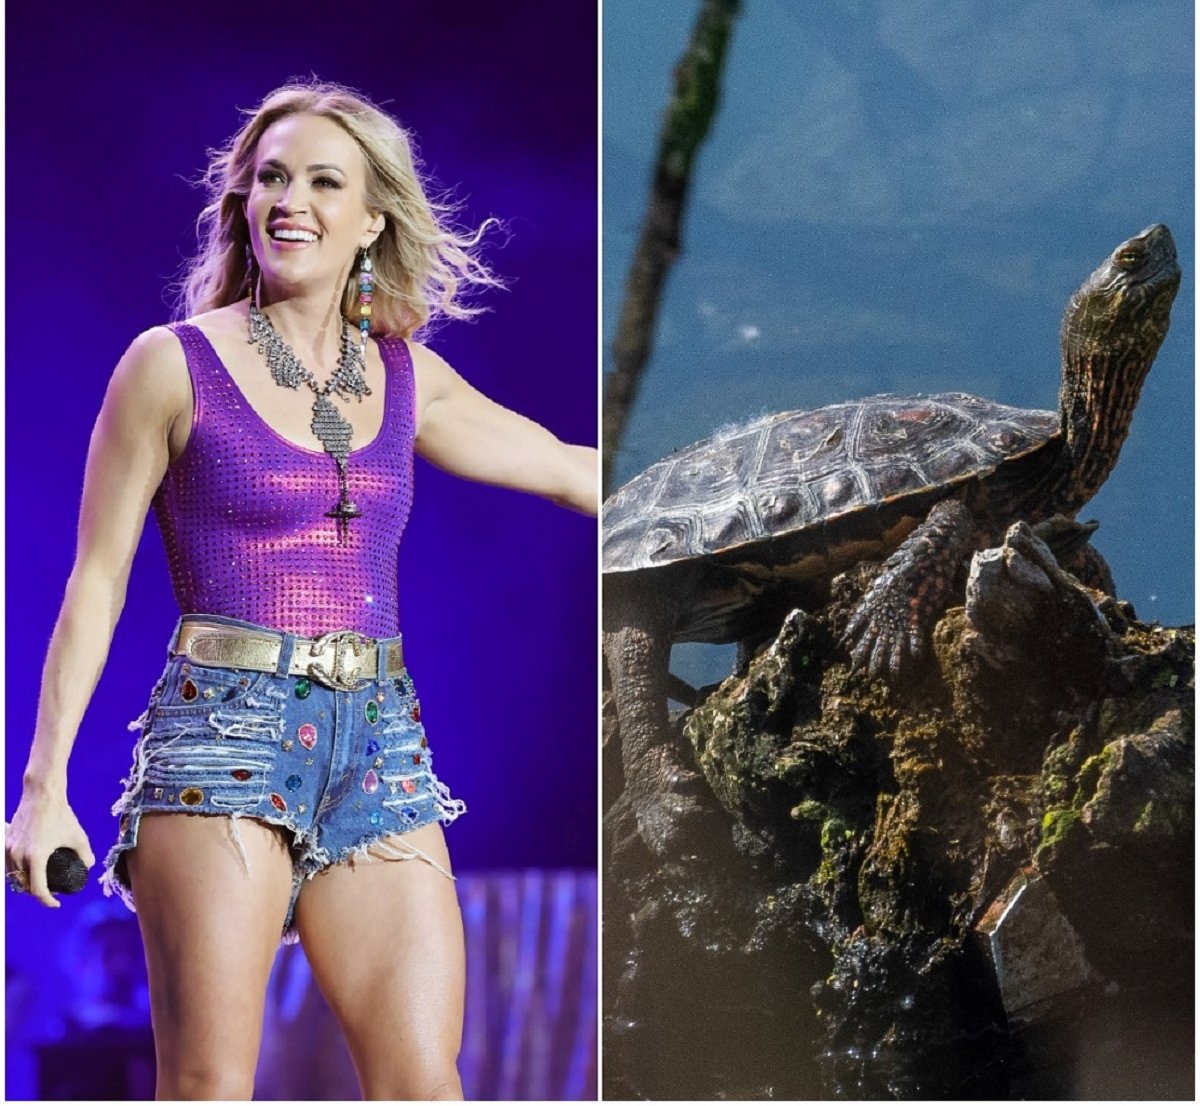 (L): Carrie Underwood performing at the 2022 Stagecoach Festival, (R): A turtle sunbathing on a log in a lake